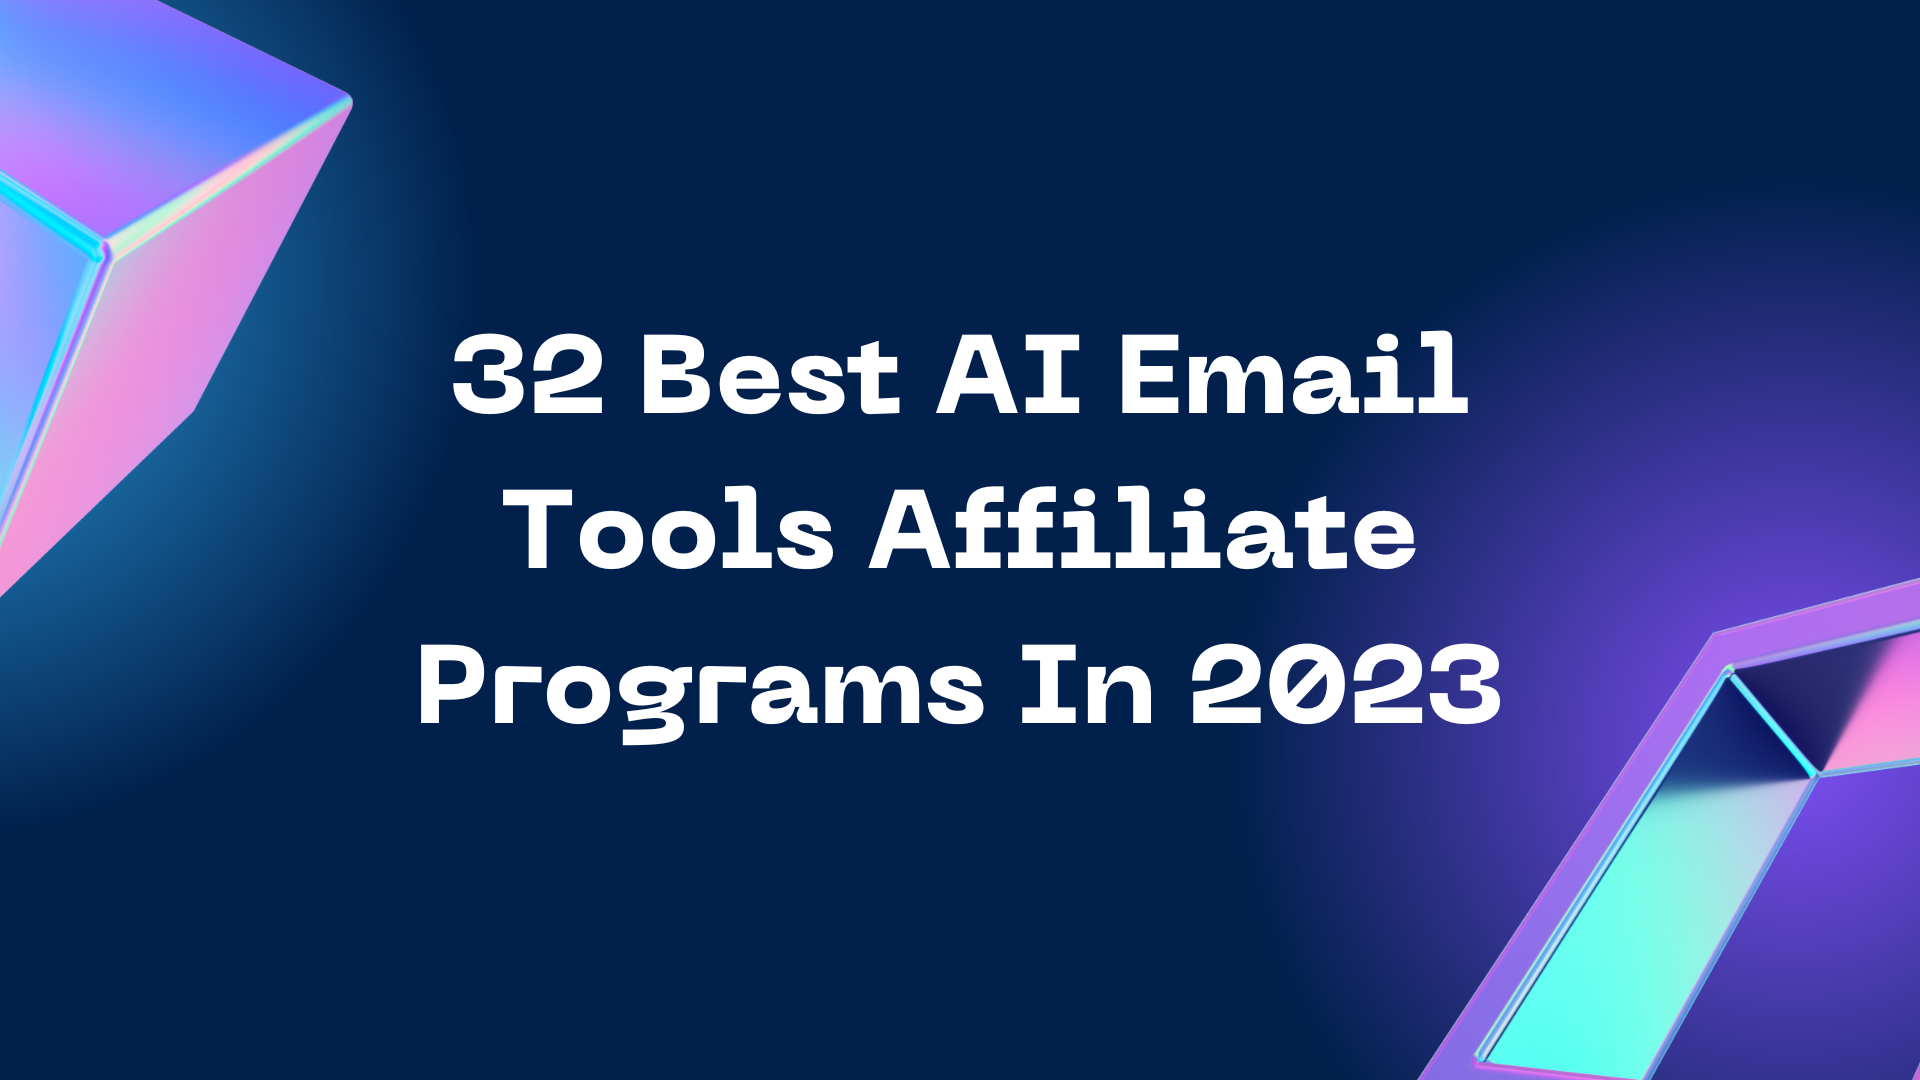 32 Best AI Email Tools Affiliate Programs In 2023